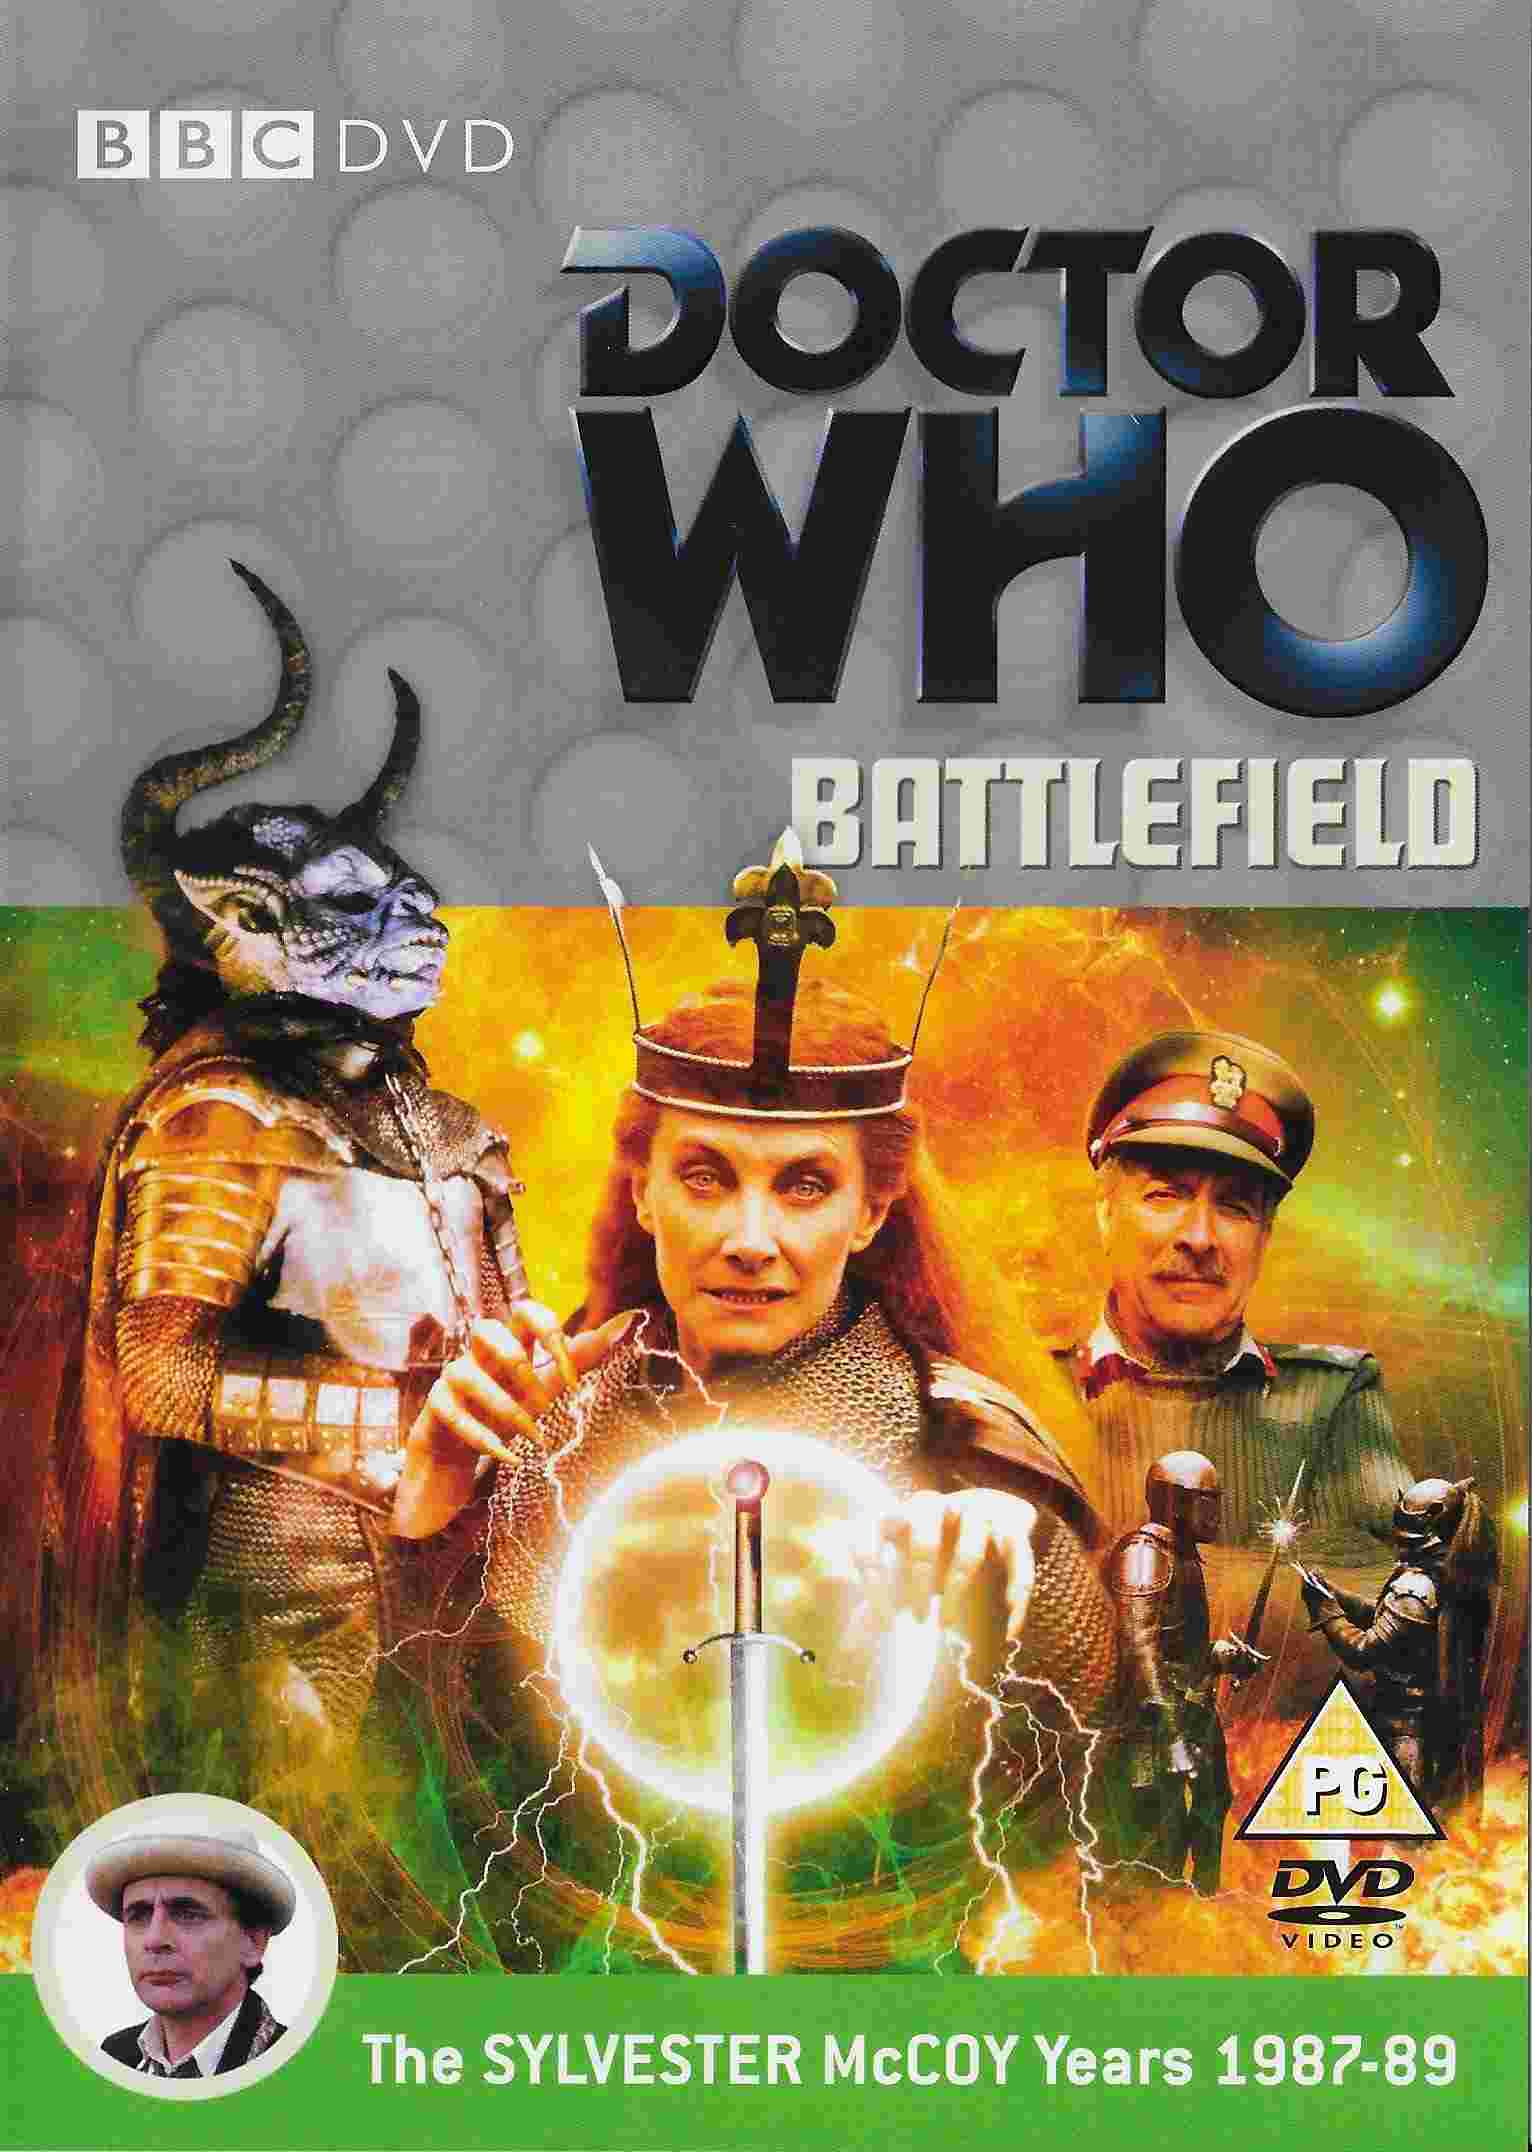 Picture of BBCDVD 2440 Doctor Who - Battlefield by artist Ben Aaronovitch from the BBC records and Tapes library